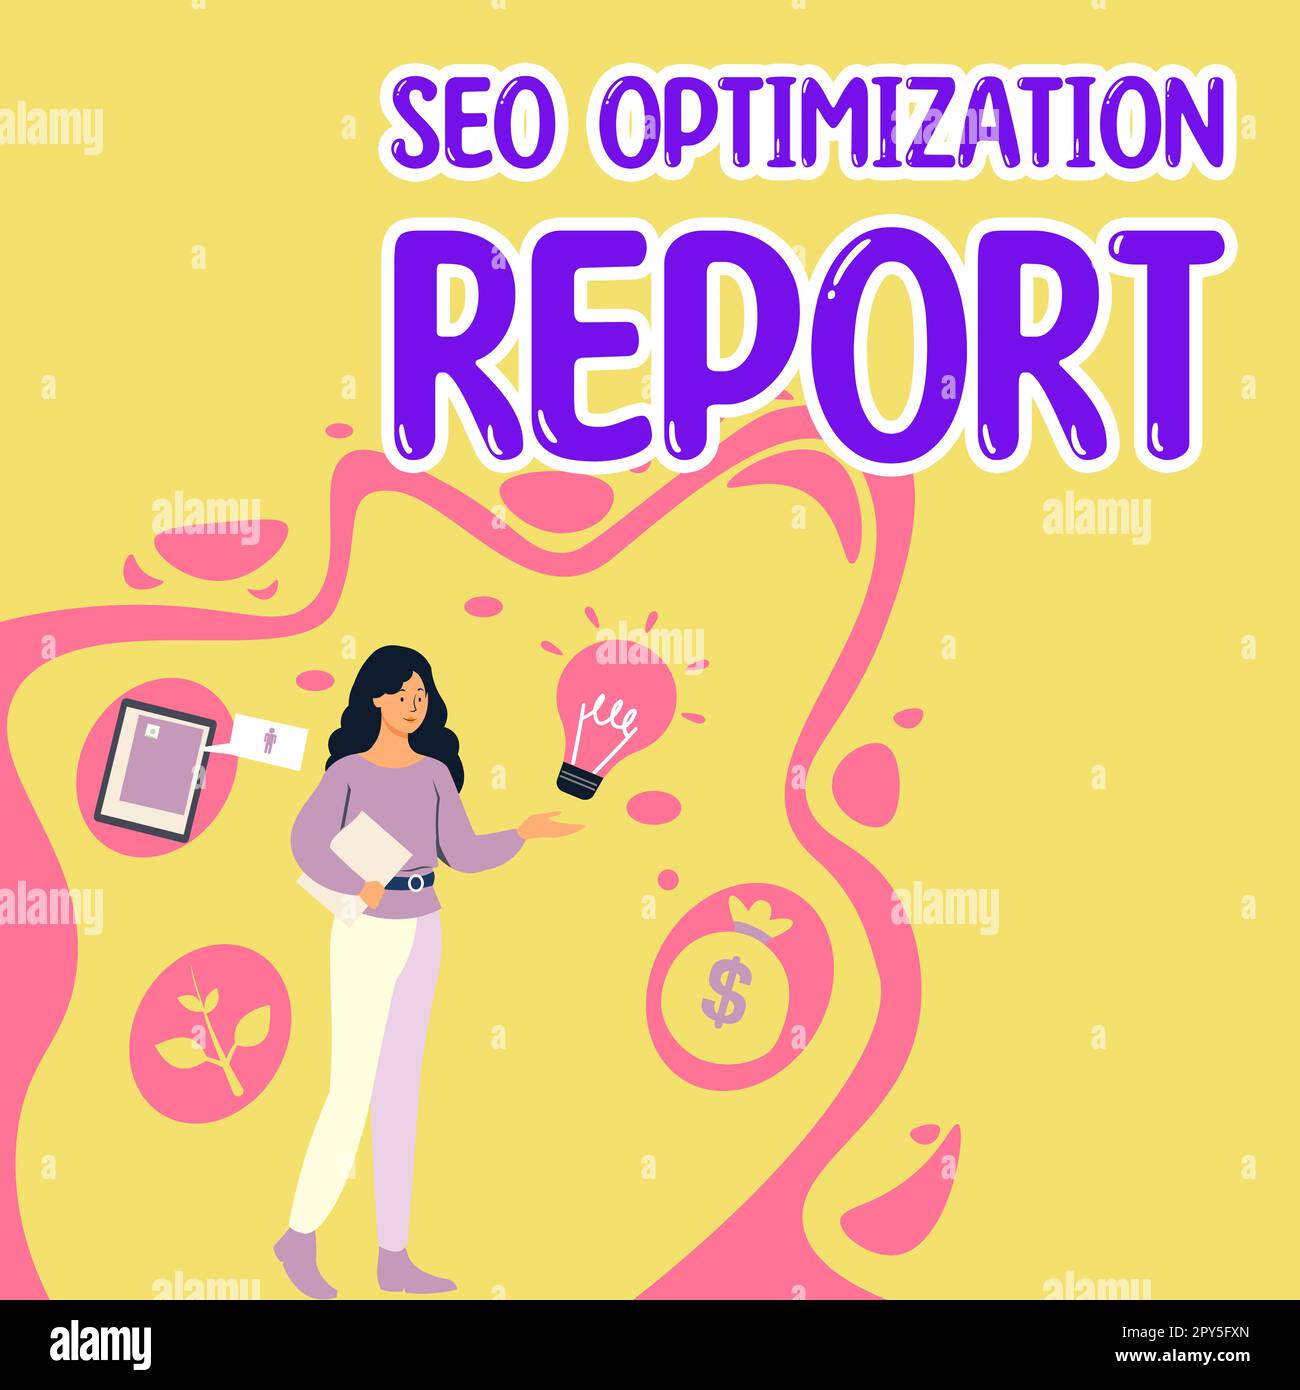 Sign displaying Seo Optimization Report. Business idea process of affecting online visibility of website or page Stock Photo